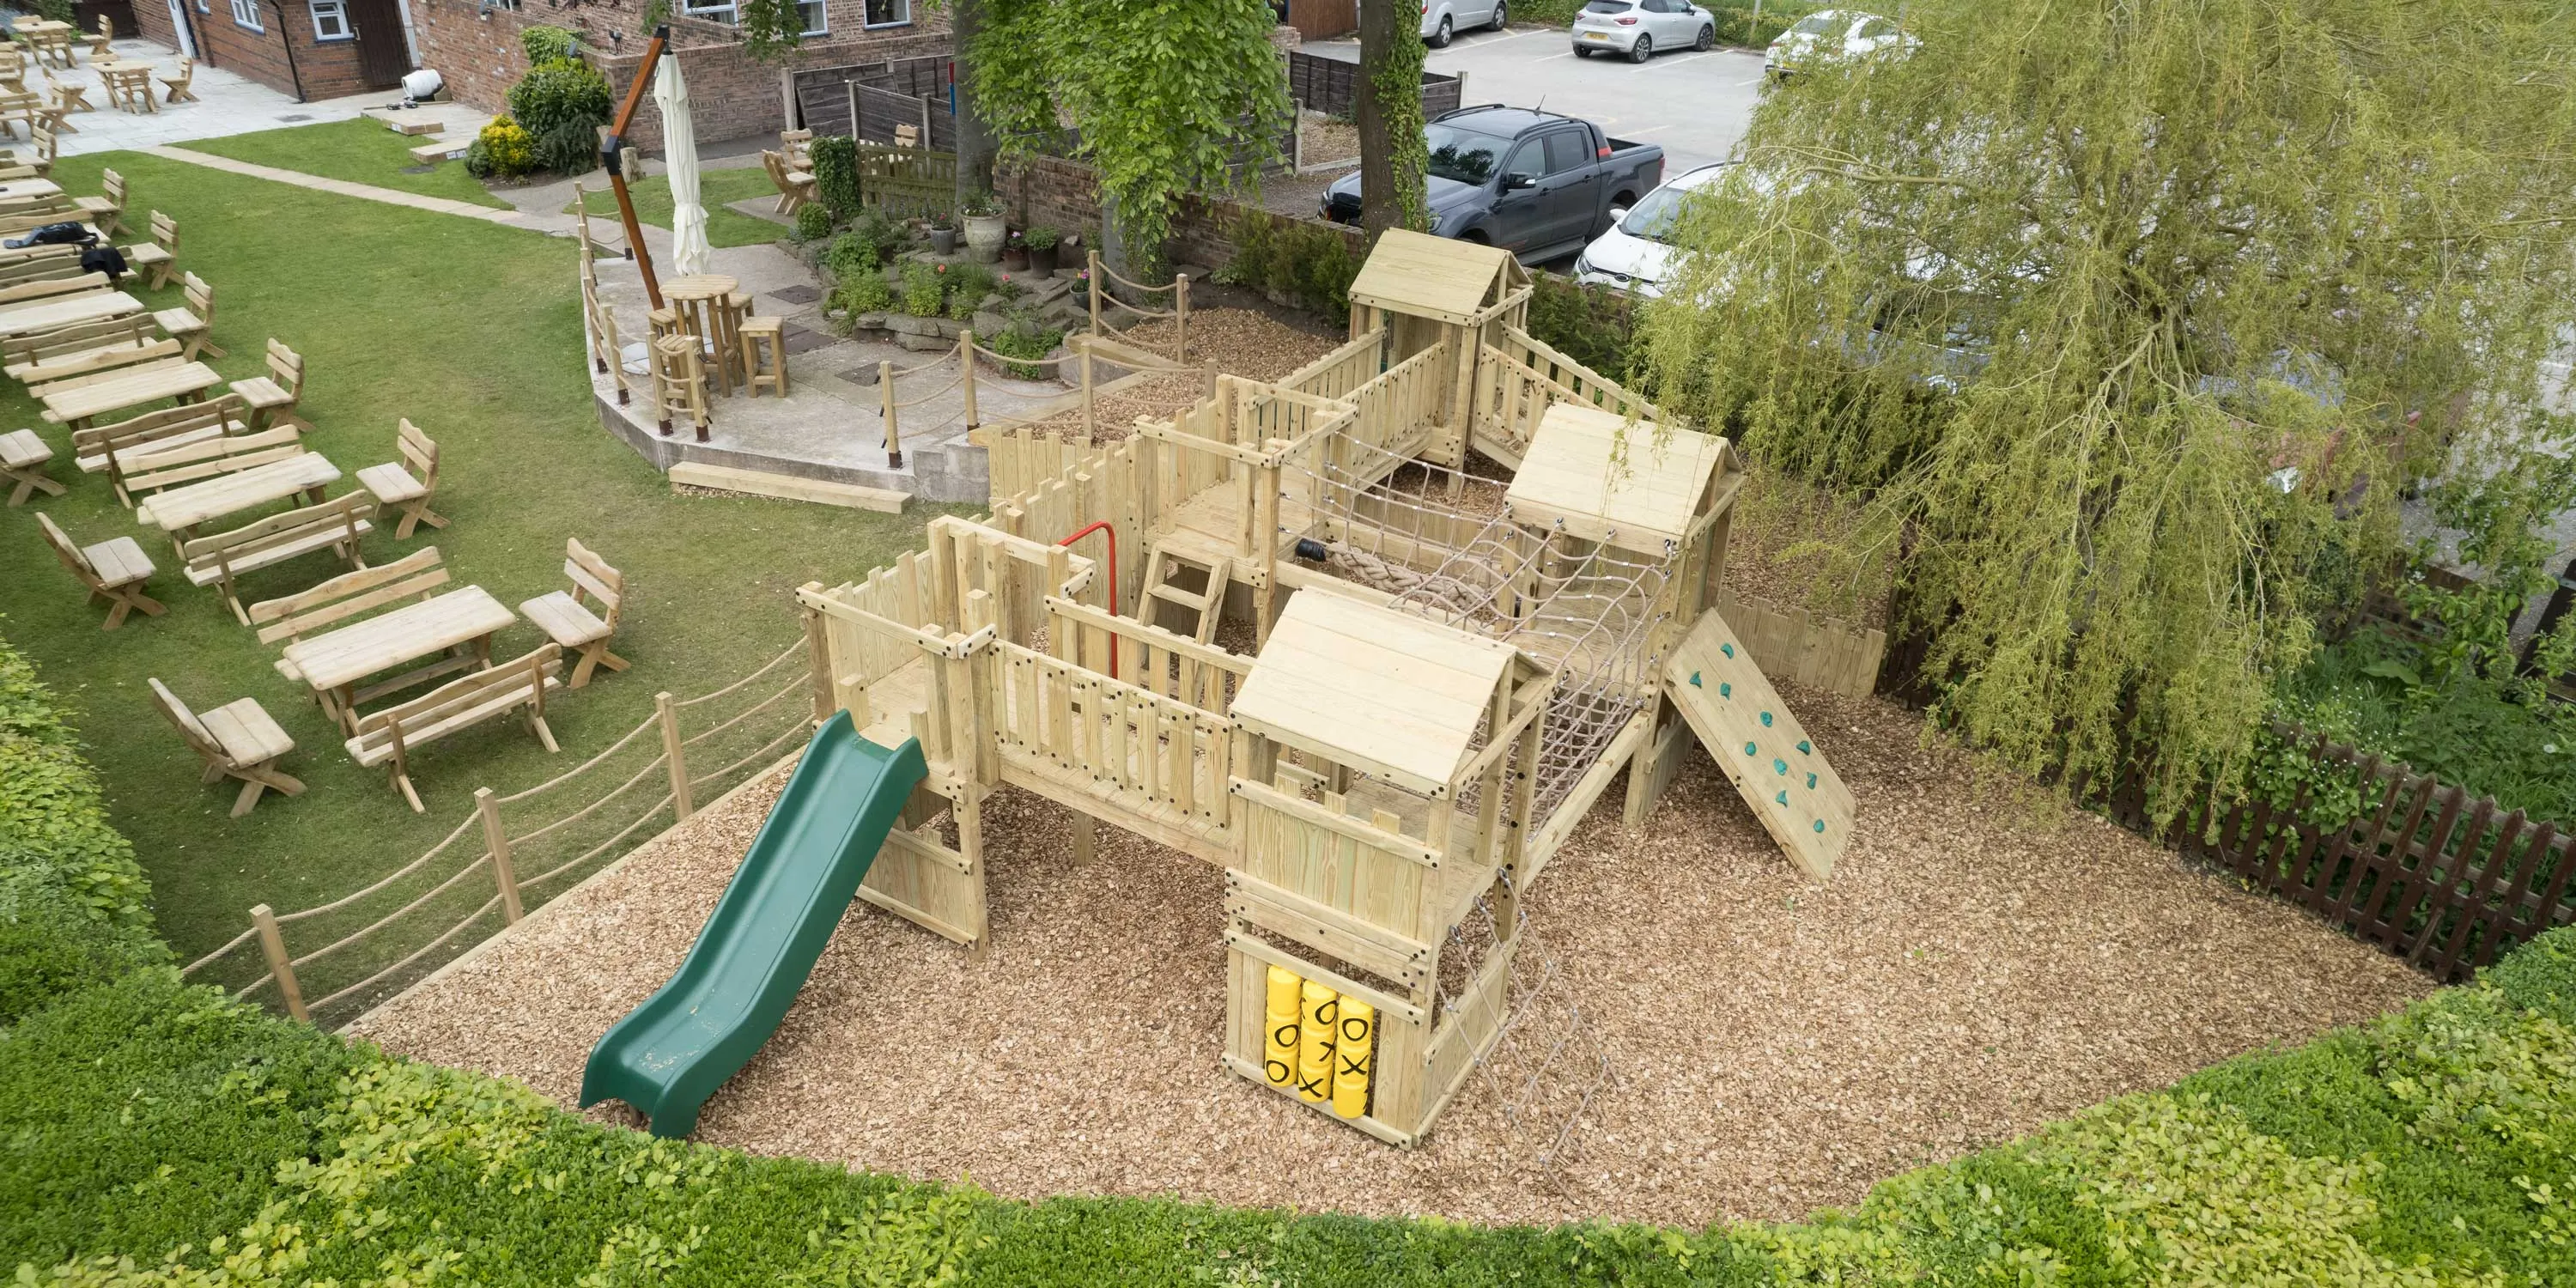 Commercial playgrounds image 3